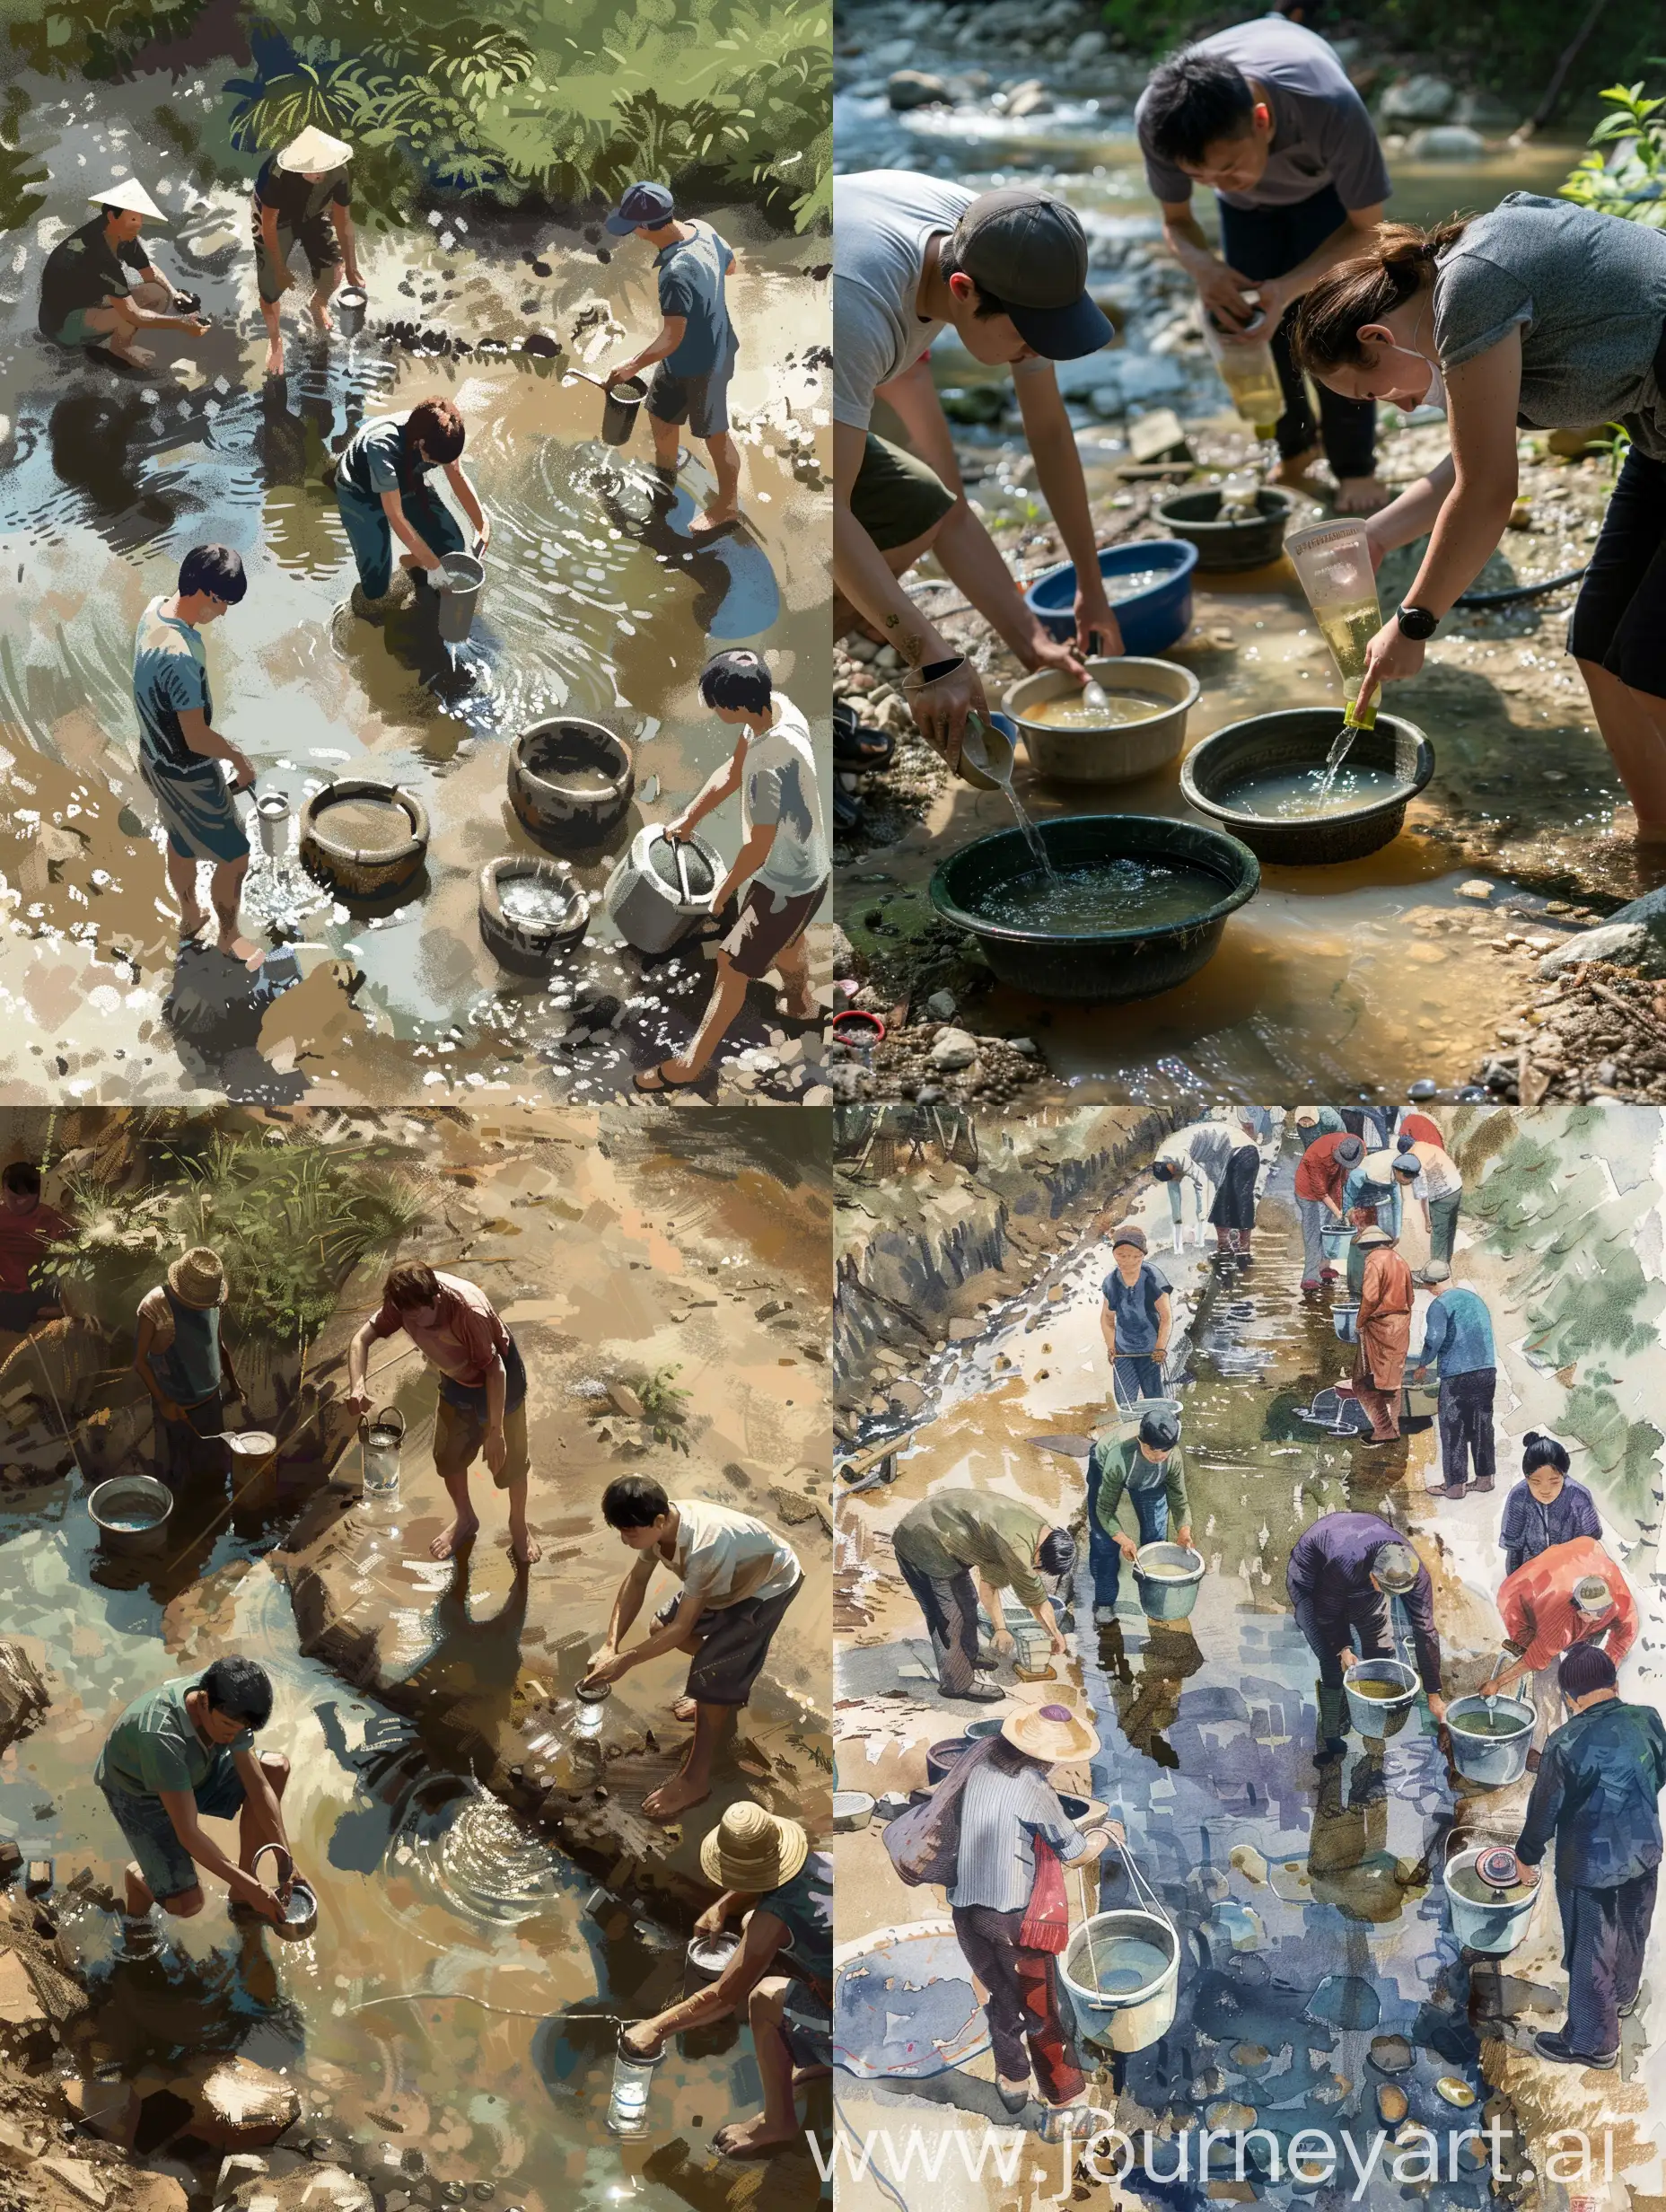 People filtering water from dirty water sources,realistic